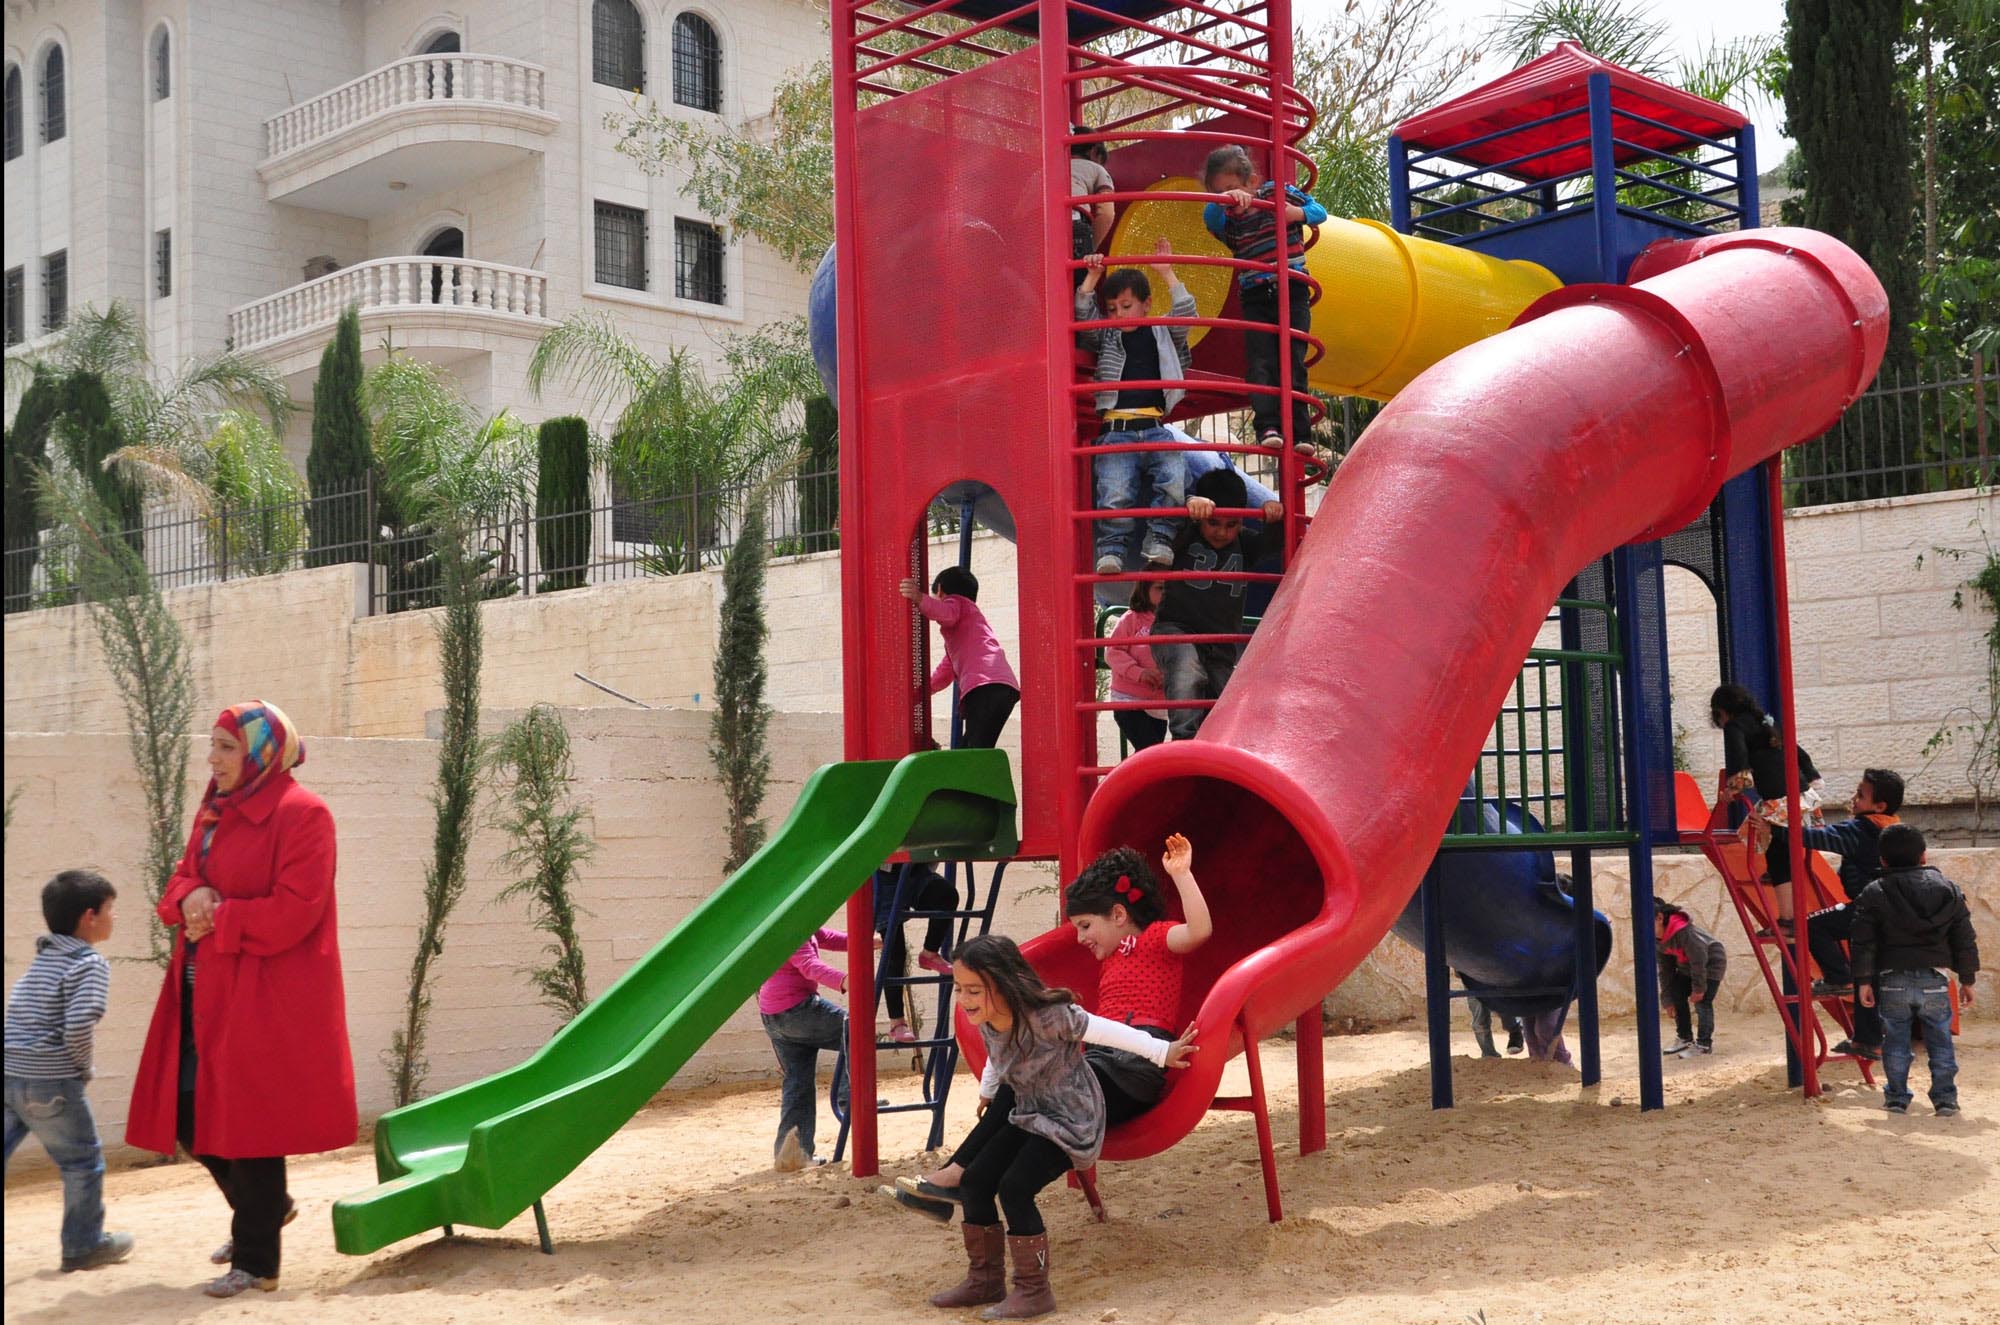 Bright red and green slide attract children of Ras Karkar in new public park Anera built in the West Bank village.